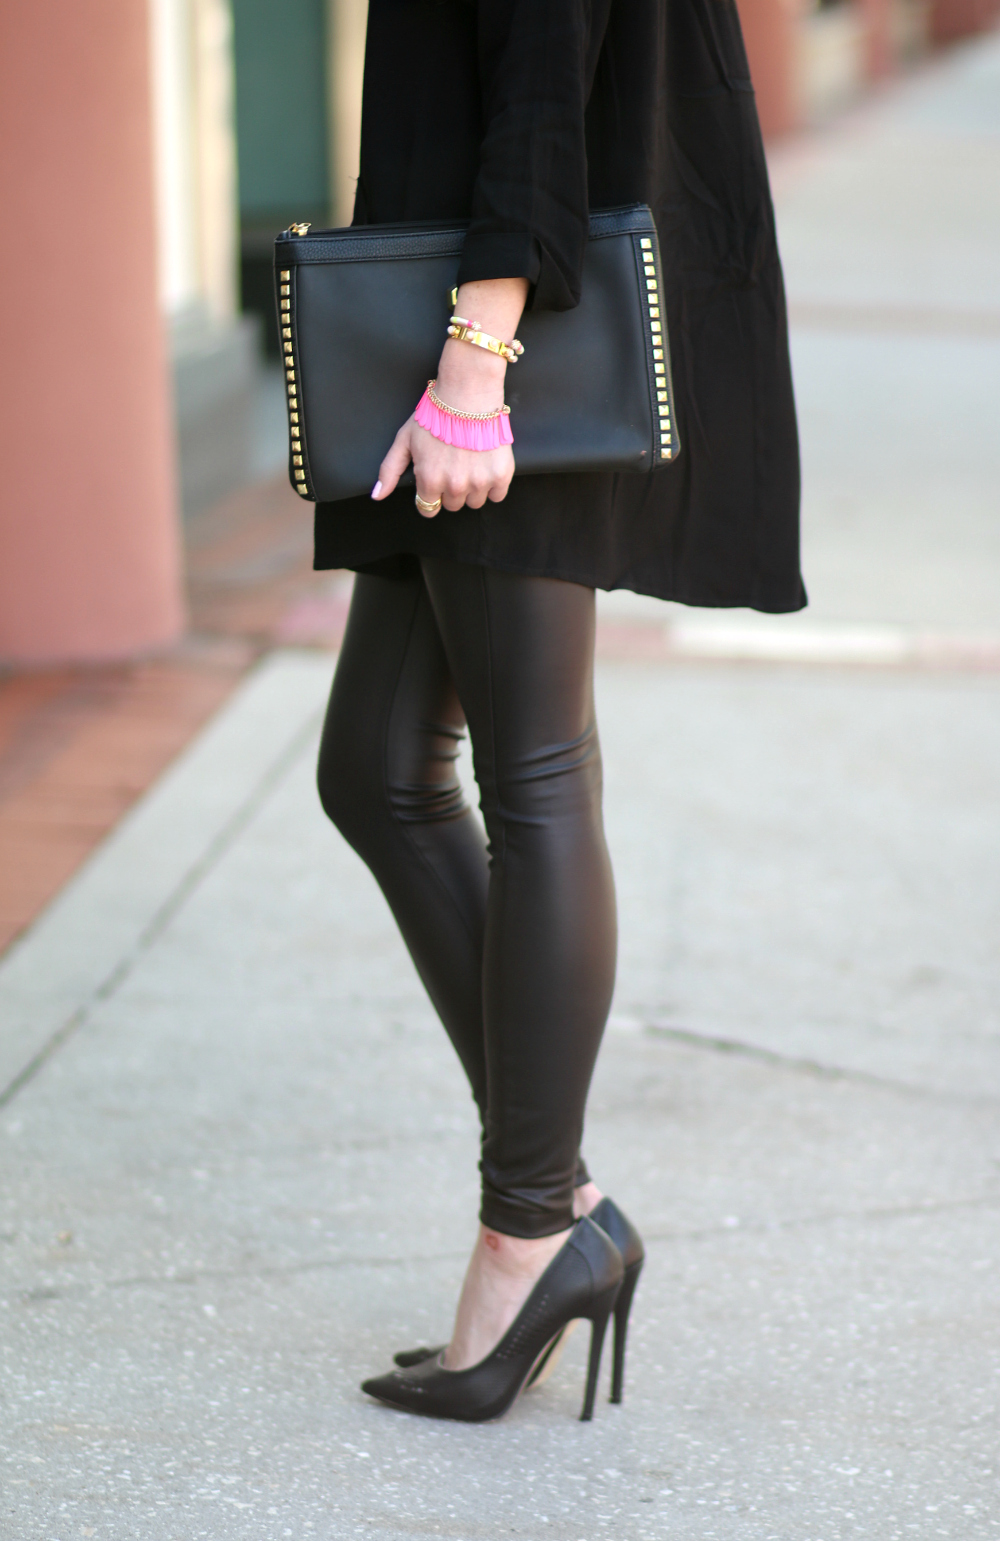 How to wear leather leggings casually by southern fashion blogger Stephanie Ziajka from Diary of a Debutante